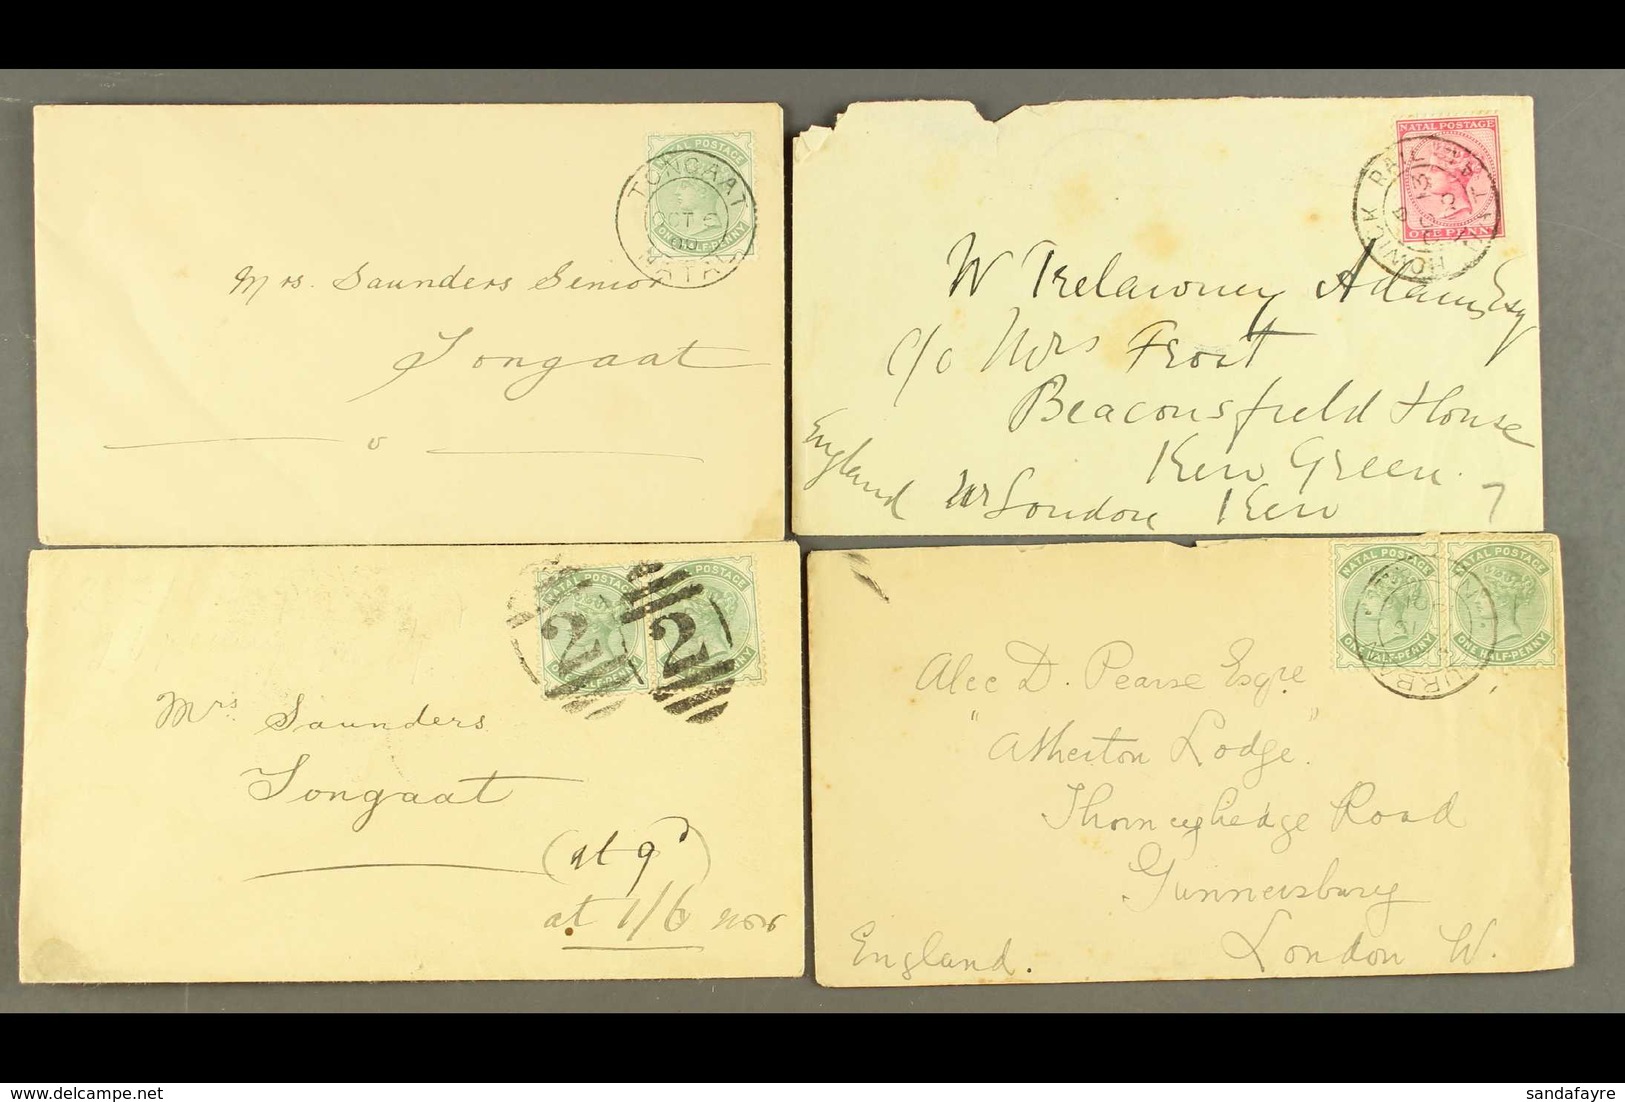 NATAL 1898-1901 Group Of Four Covers, Bearing QV Stamps Cancelled At TONGAAT, HOWICK RAIL, Plus Durban And "2" Numerals. - Unclassified